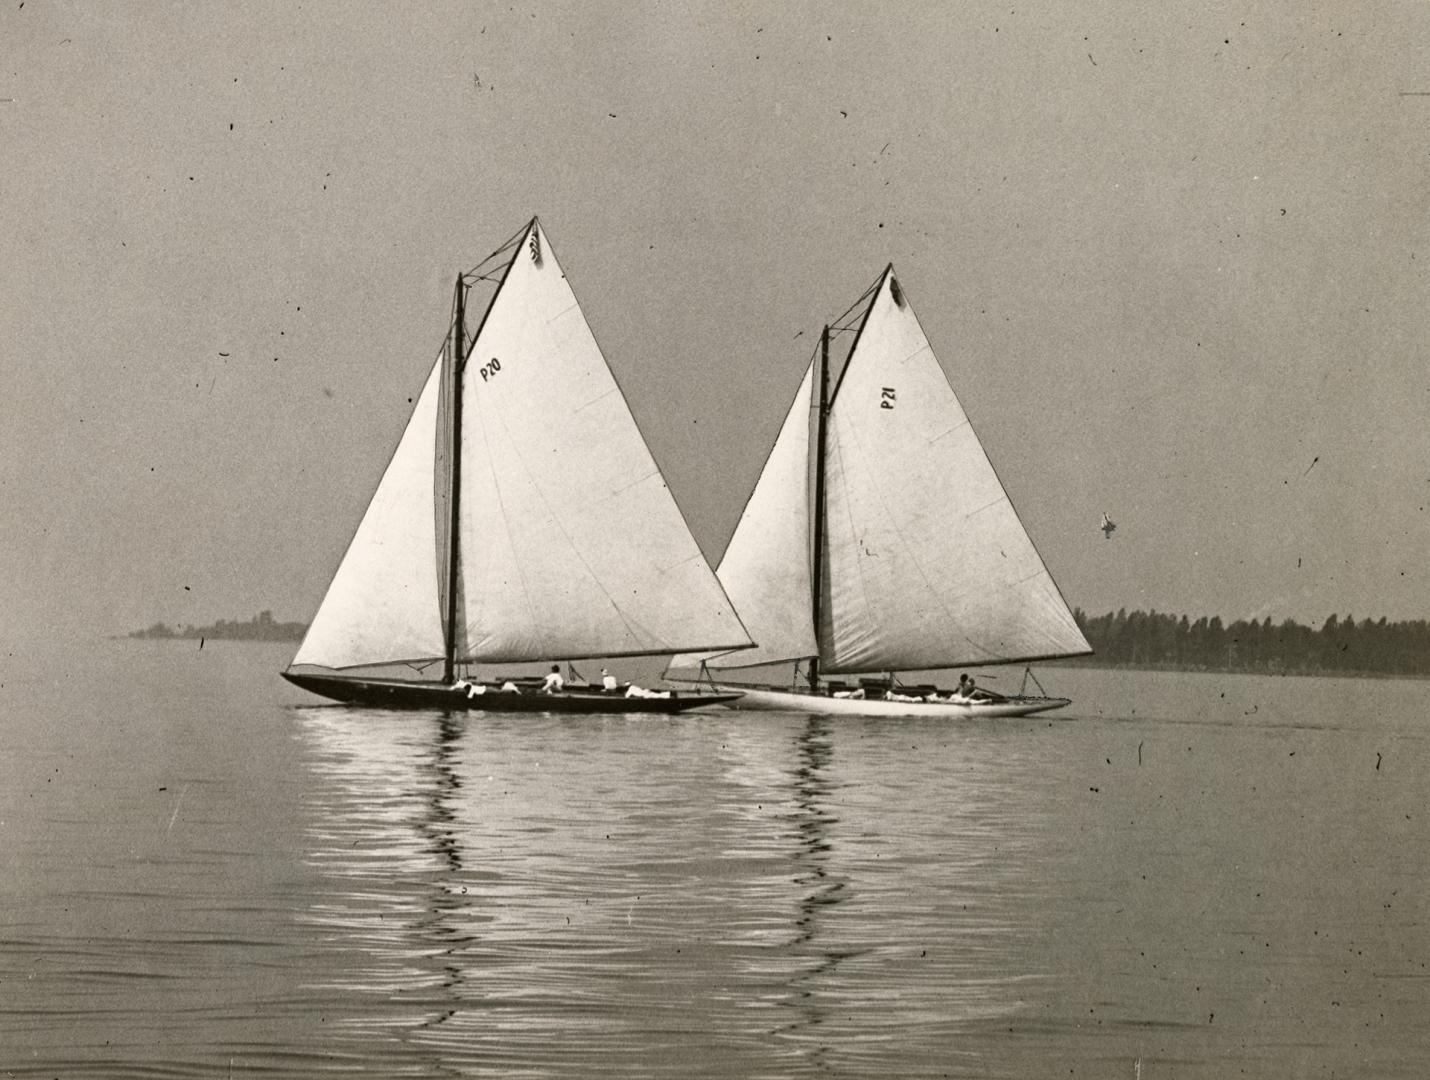 Black and white photograph of two sailboats in Toronto Harbour under full sail.